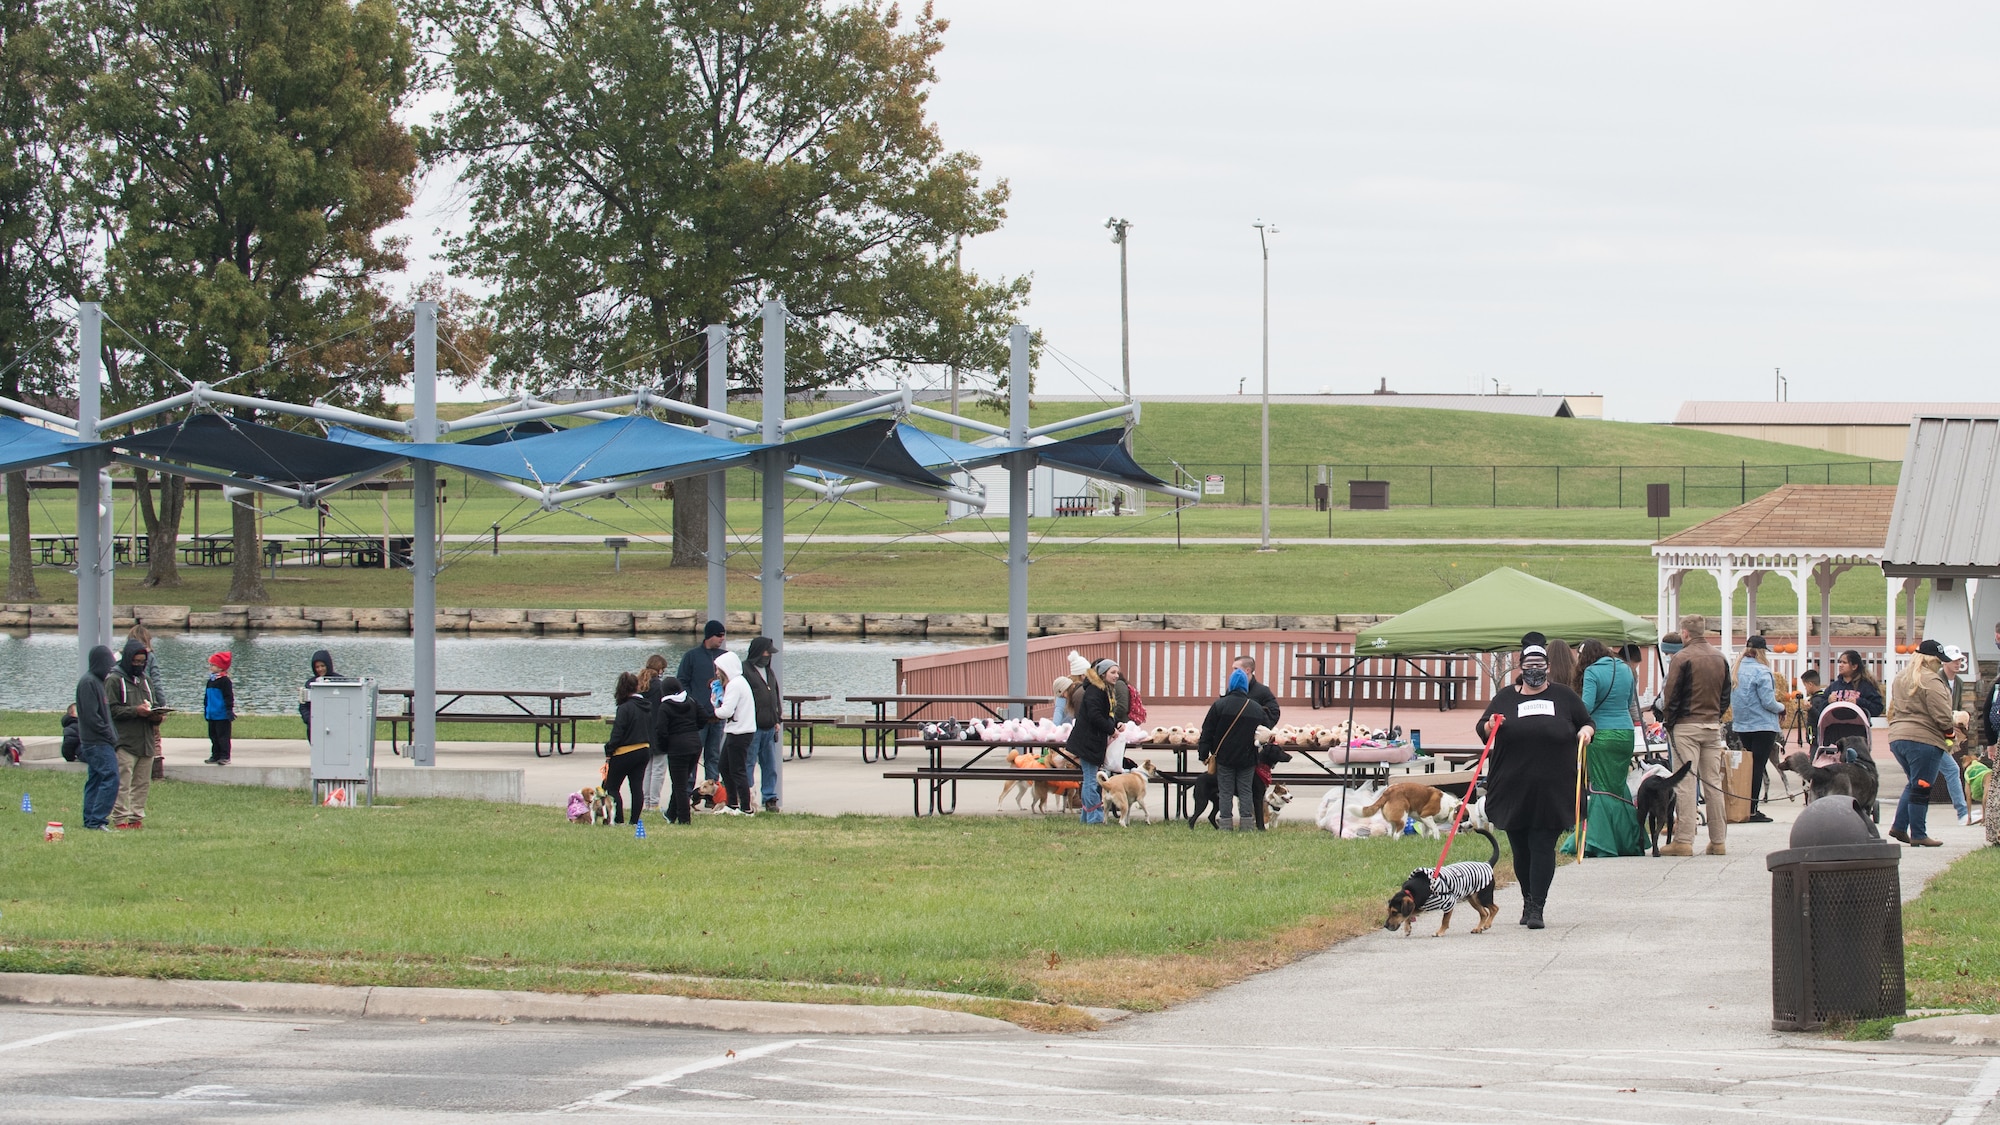 Members of Team Whiteman and their dogs participate in various activities during the Bark in the Park at the Ike Skelton Lake.